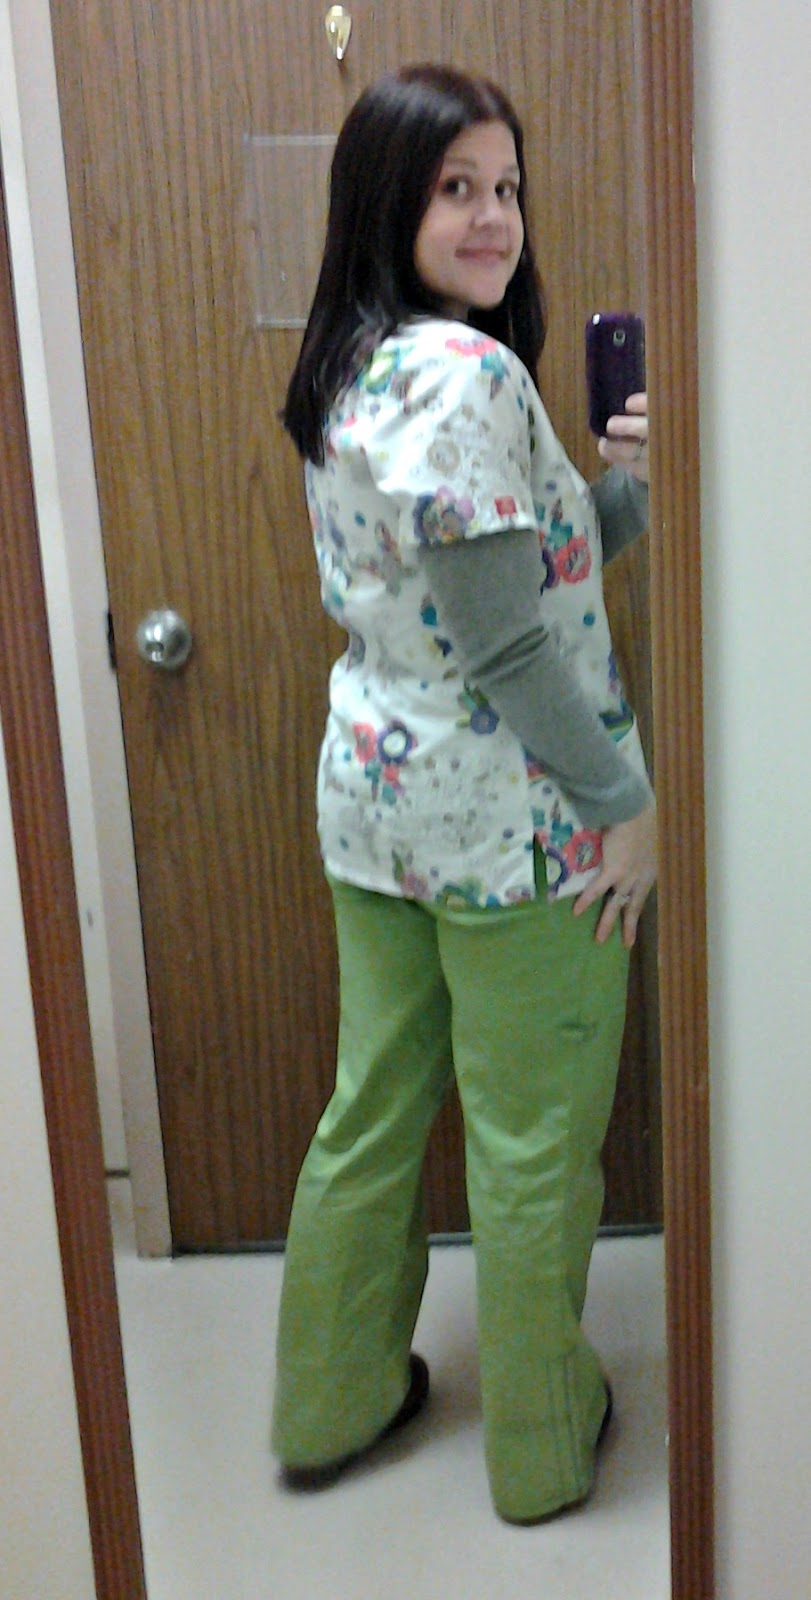 Putting the FUN in DysFUNctional: Cute Medical Scrubs ~ Review